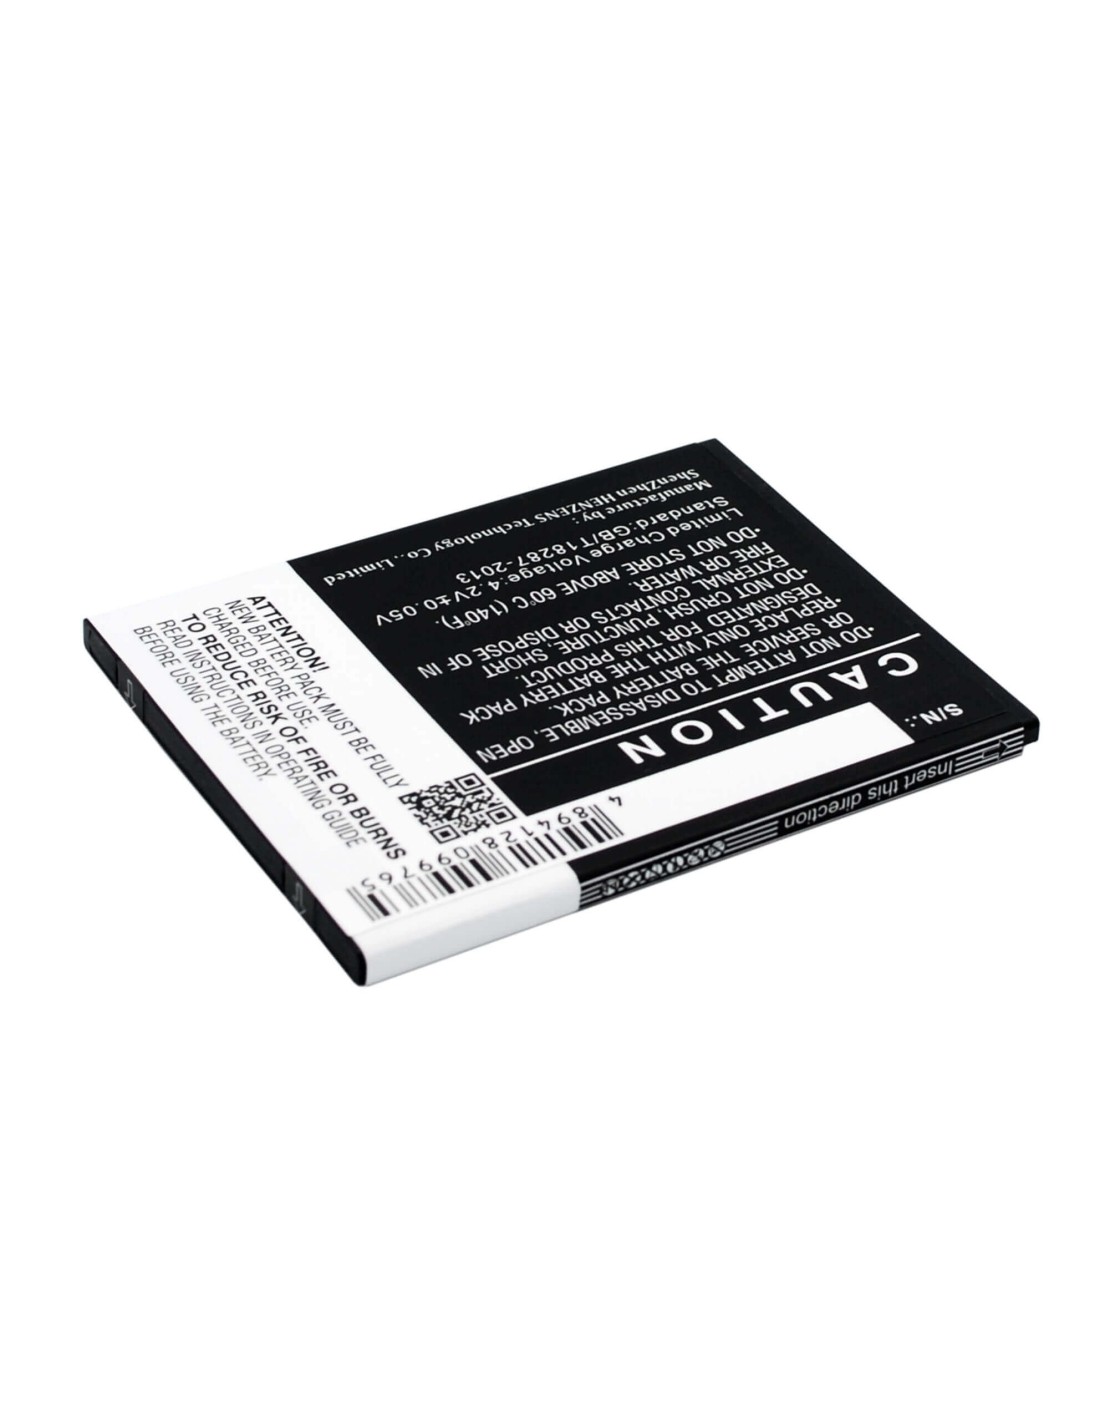 Battery for HASEE X50, W50T, W50TS 3.7V, 2150mAh - 7.96Wh